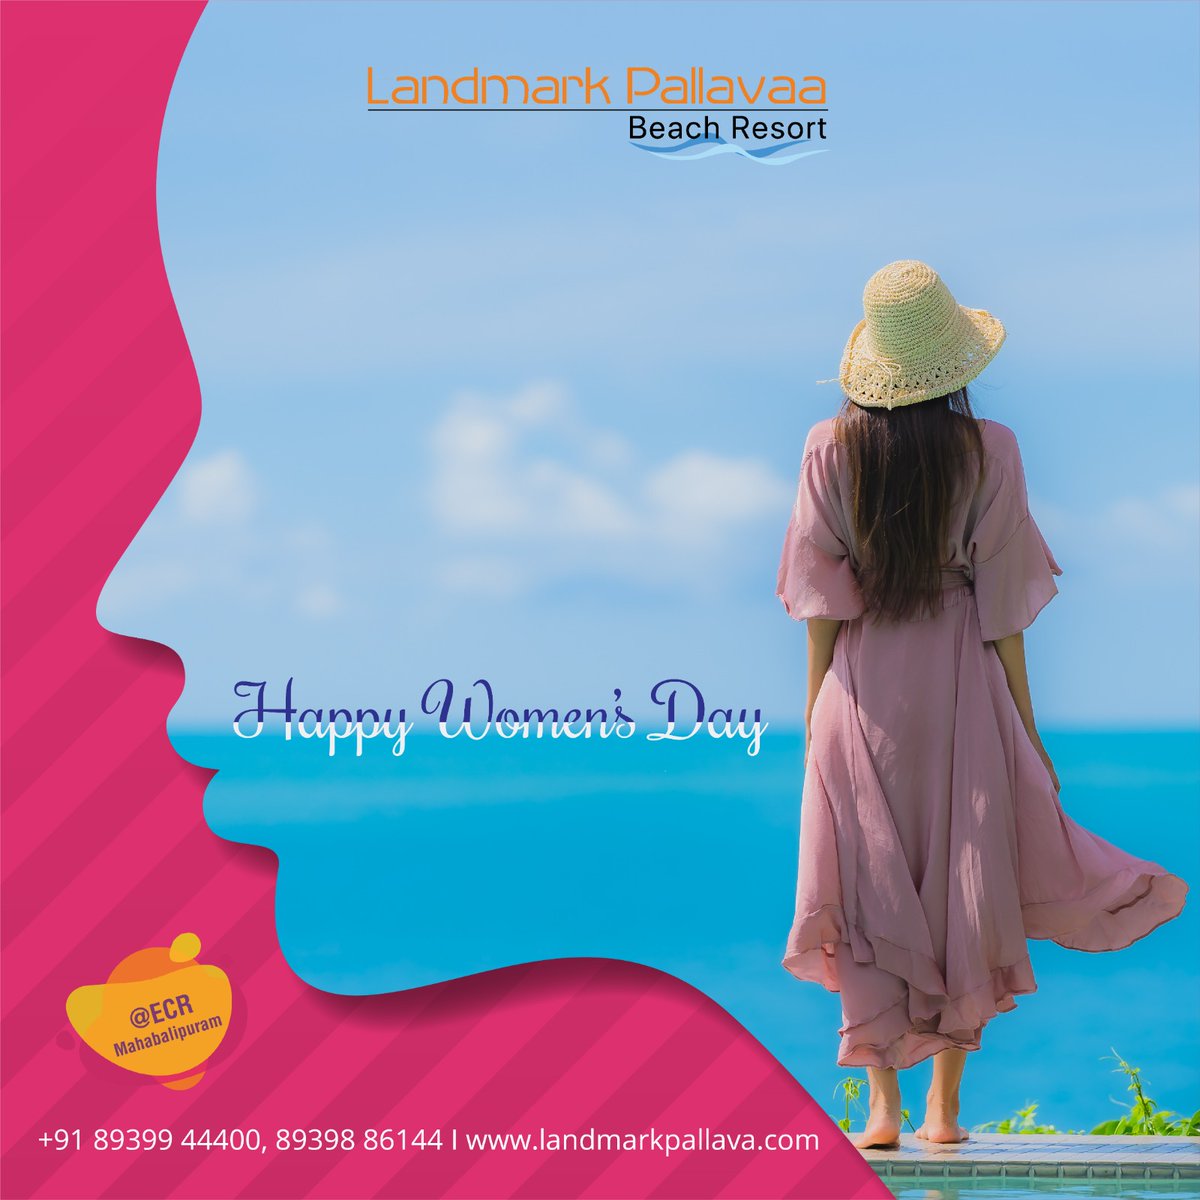 A charming woman doesn’t follow the crowd; she is herself. Happy Women’s Day!

For Exciting Offers, Call 089399 44400 | +91 89398 86144

#LandmarkPallavaa #BeachResort  #landmarkpallavaa
#happywomensday #empowerwomen #celebratewomanhood #equalityforall #womenpower